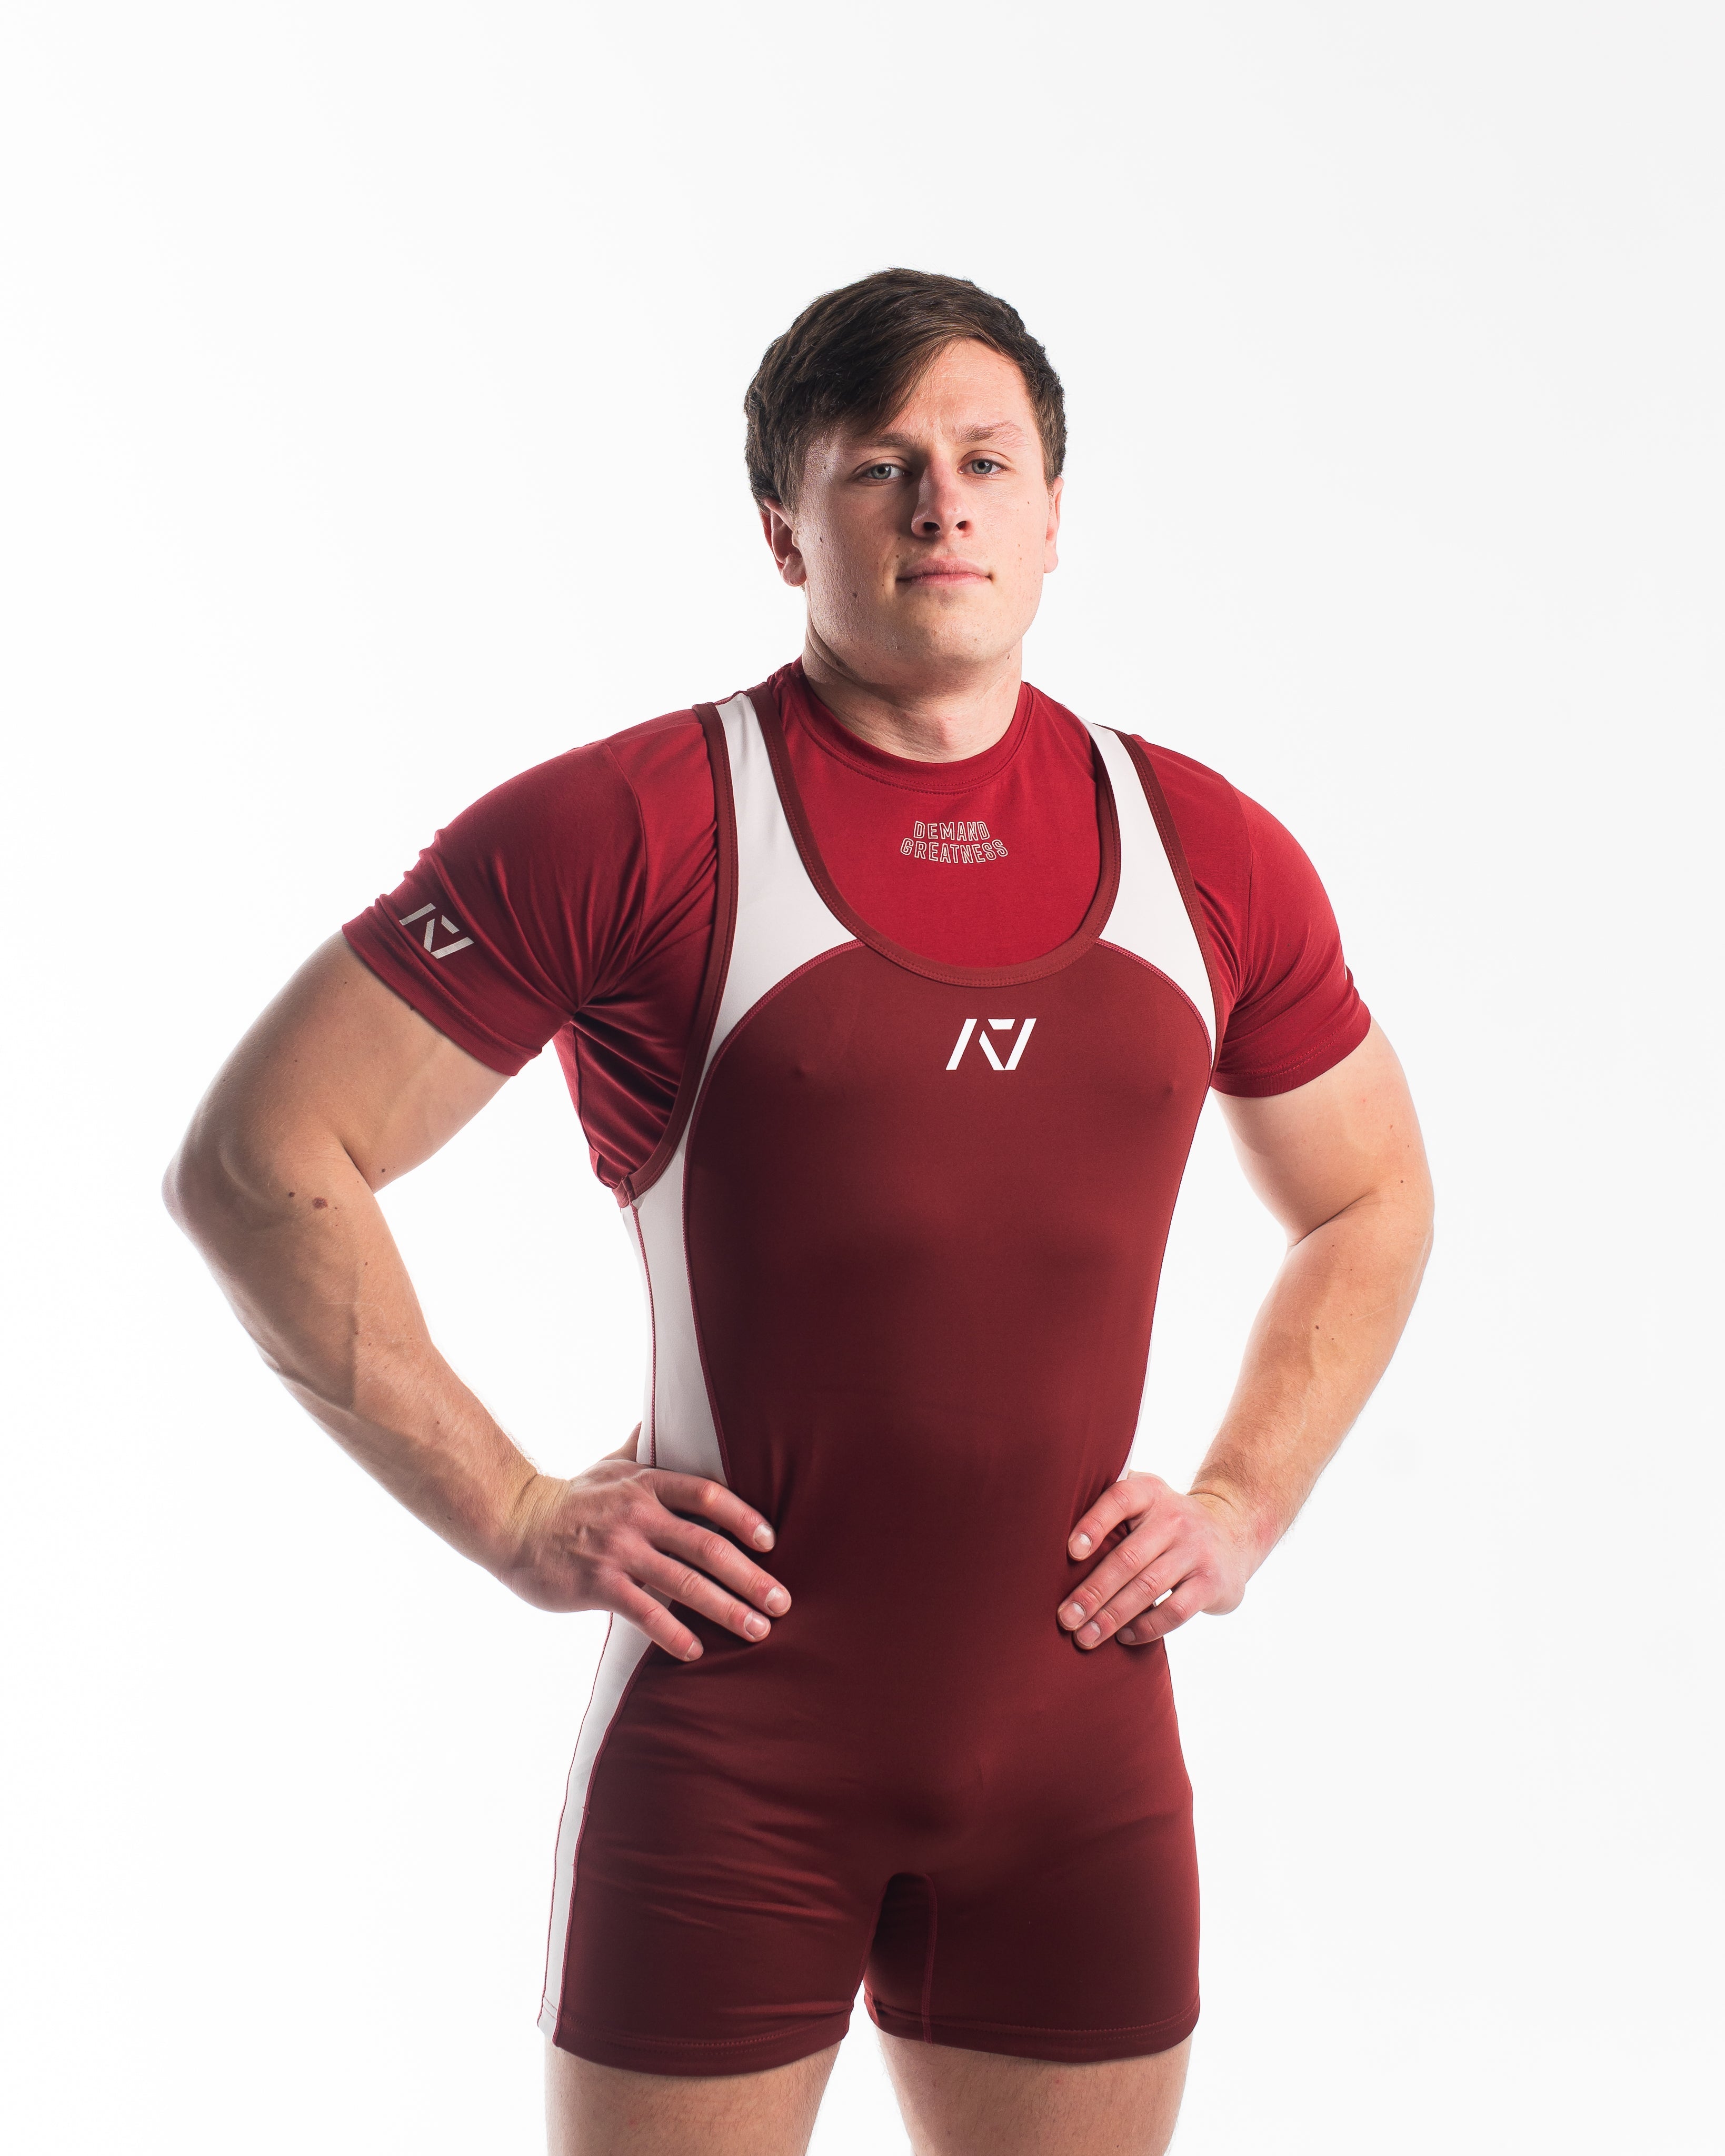 Singlets - IPF Approved – A7 UK